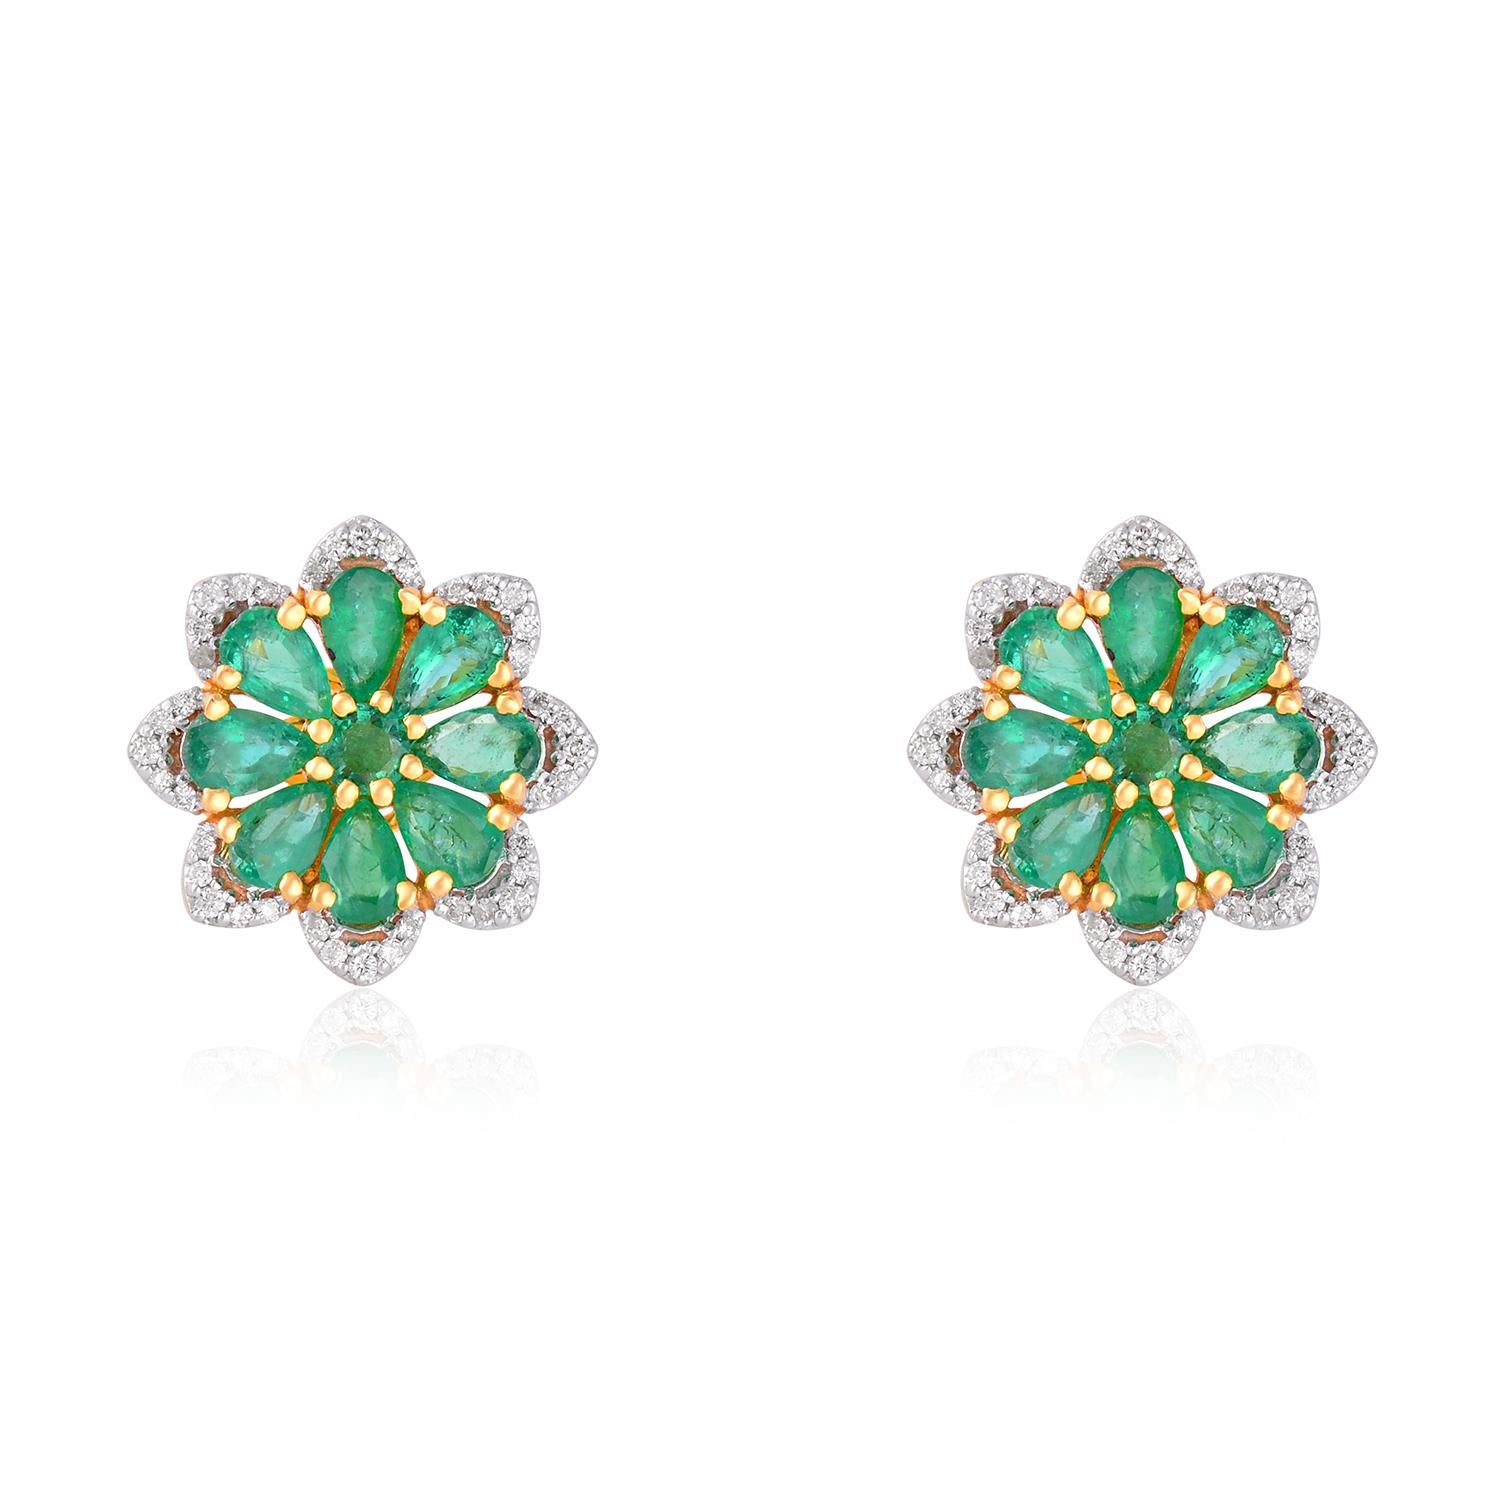 These earrings are made with emerald gemstones and diamond pave. They are set in 14K gold. Shine all day long in this delicate pair of stud earrings. Perfect for gifting, they twinkle with timeless elegance. Easy to mix and match with other